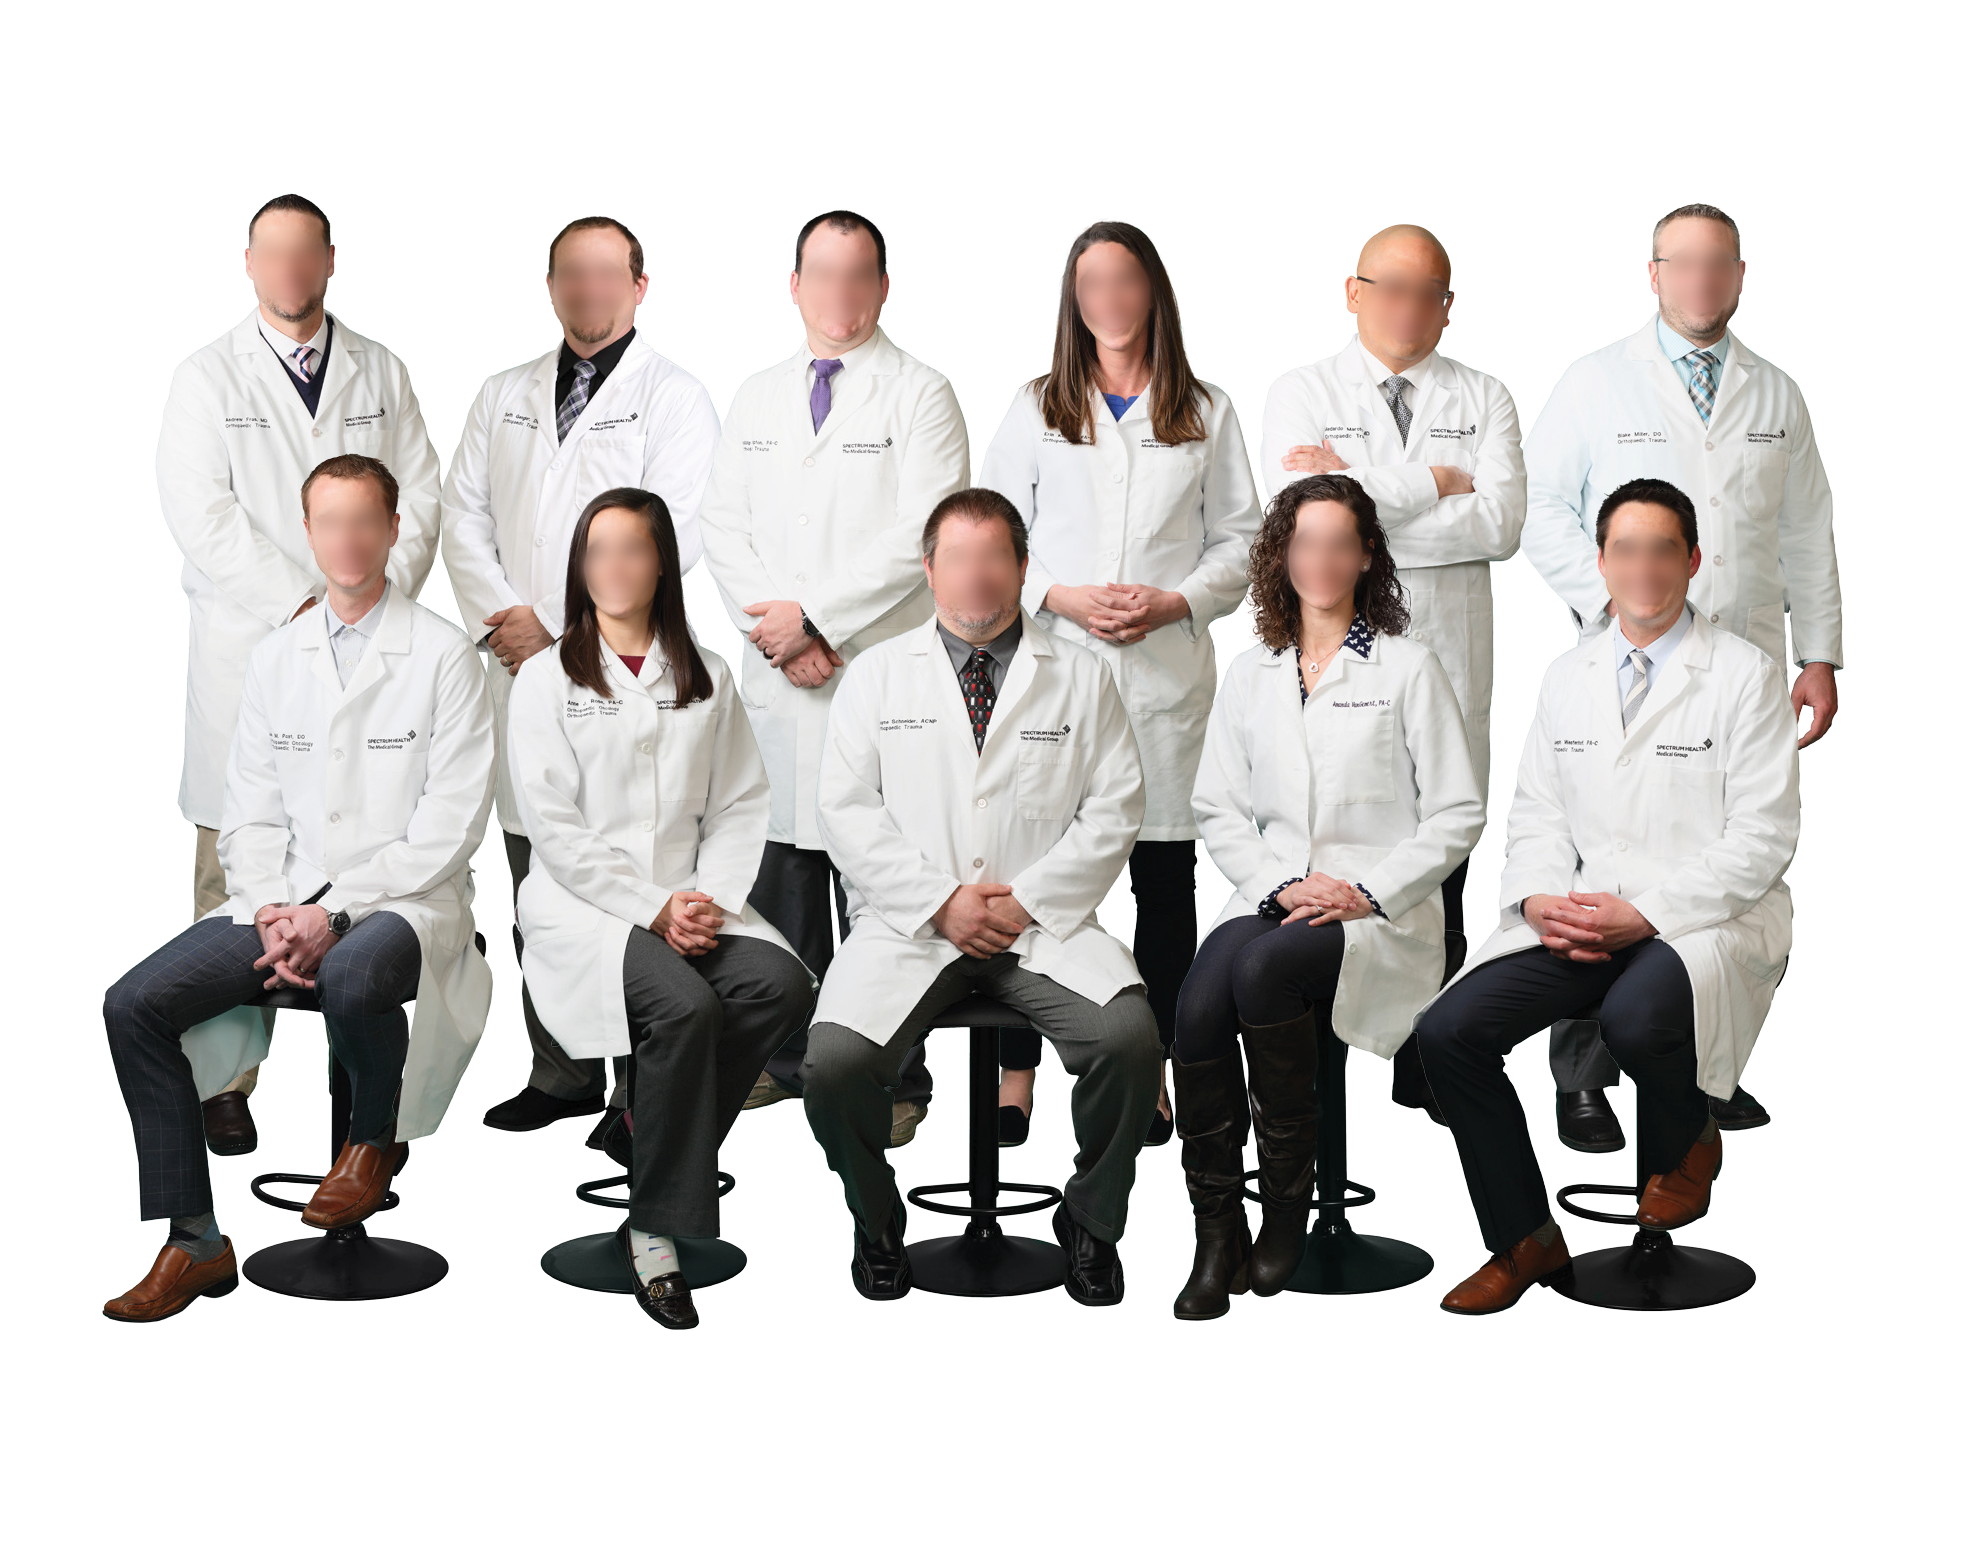 17.52.9.F - Group Images of Orthopedics Teams - Without Names-7.png